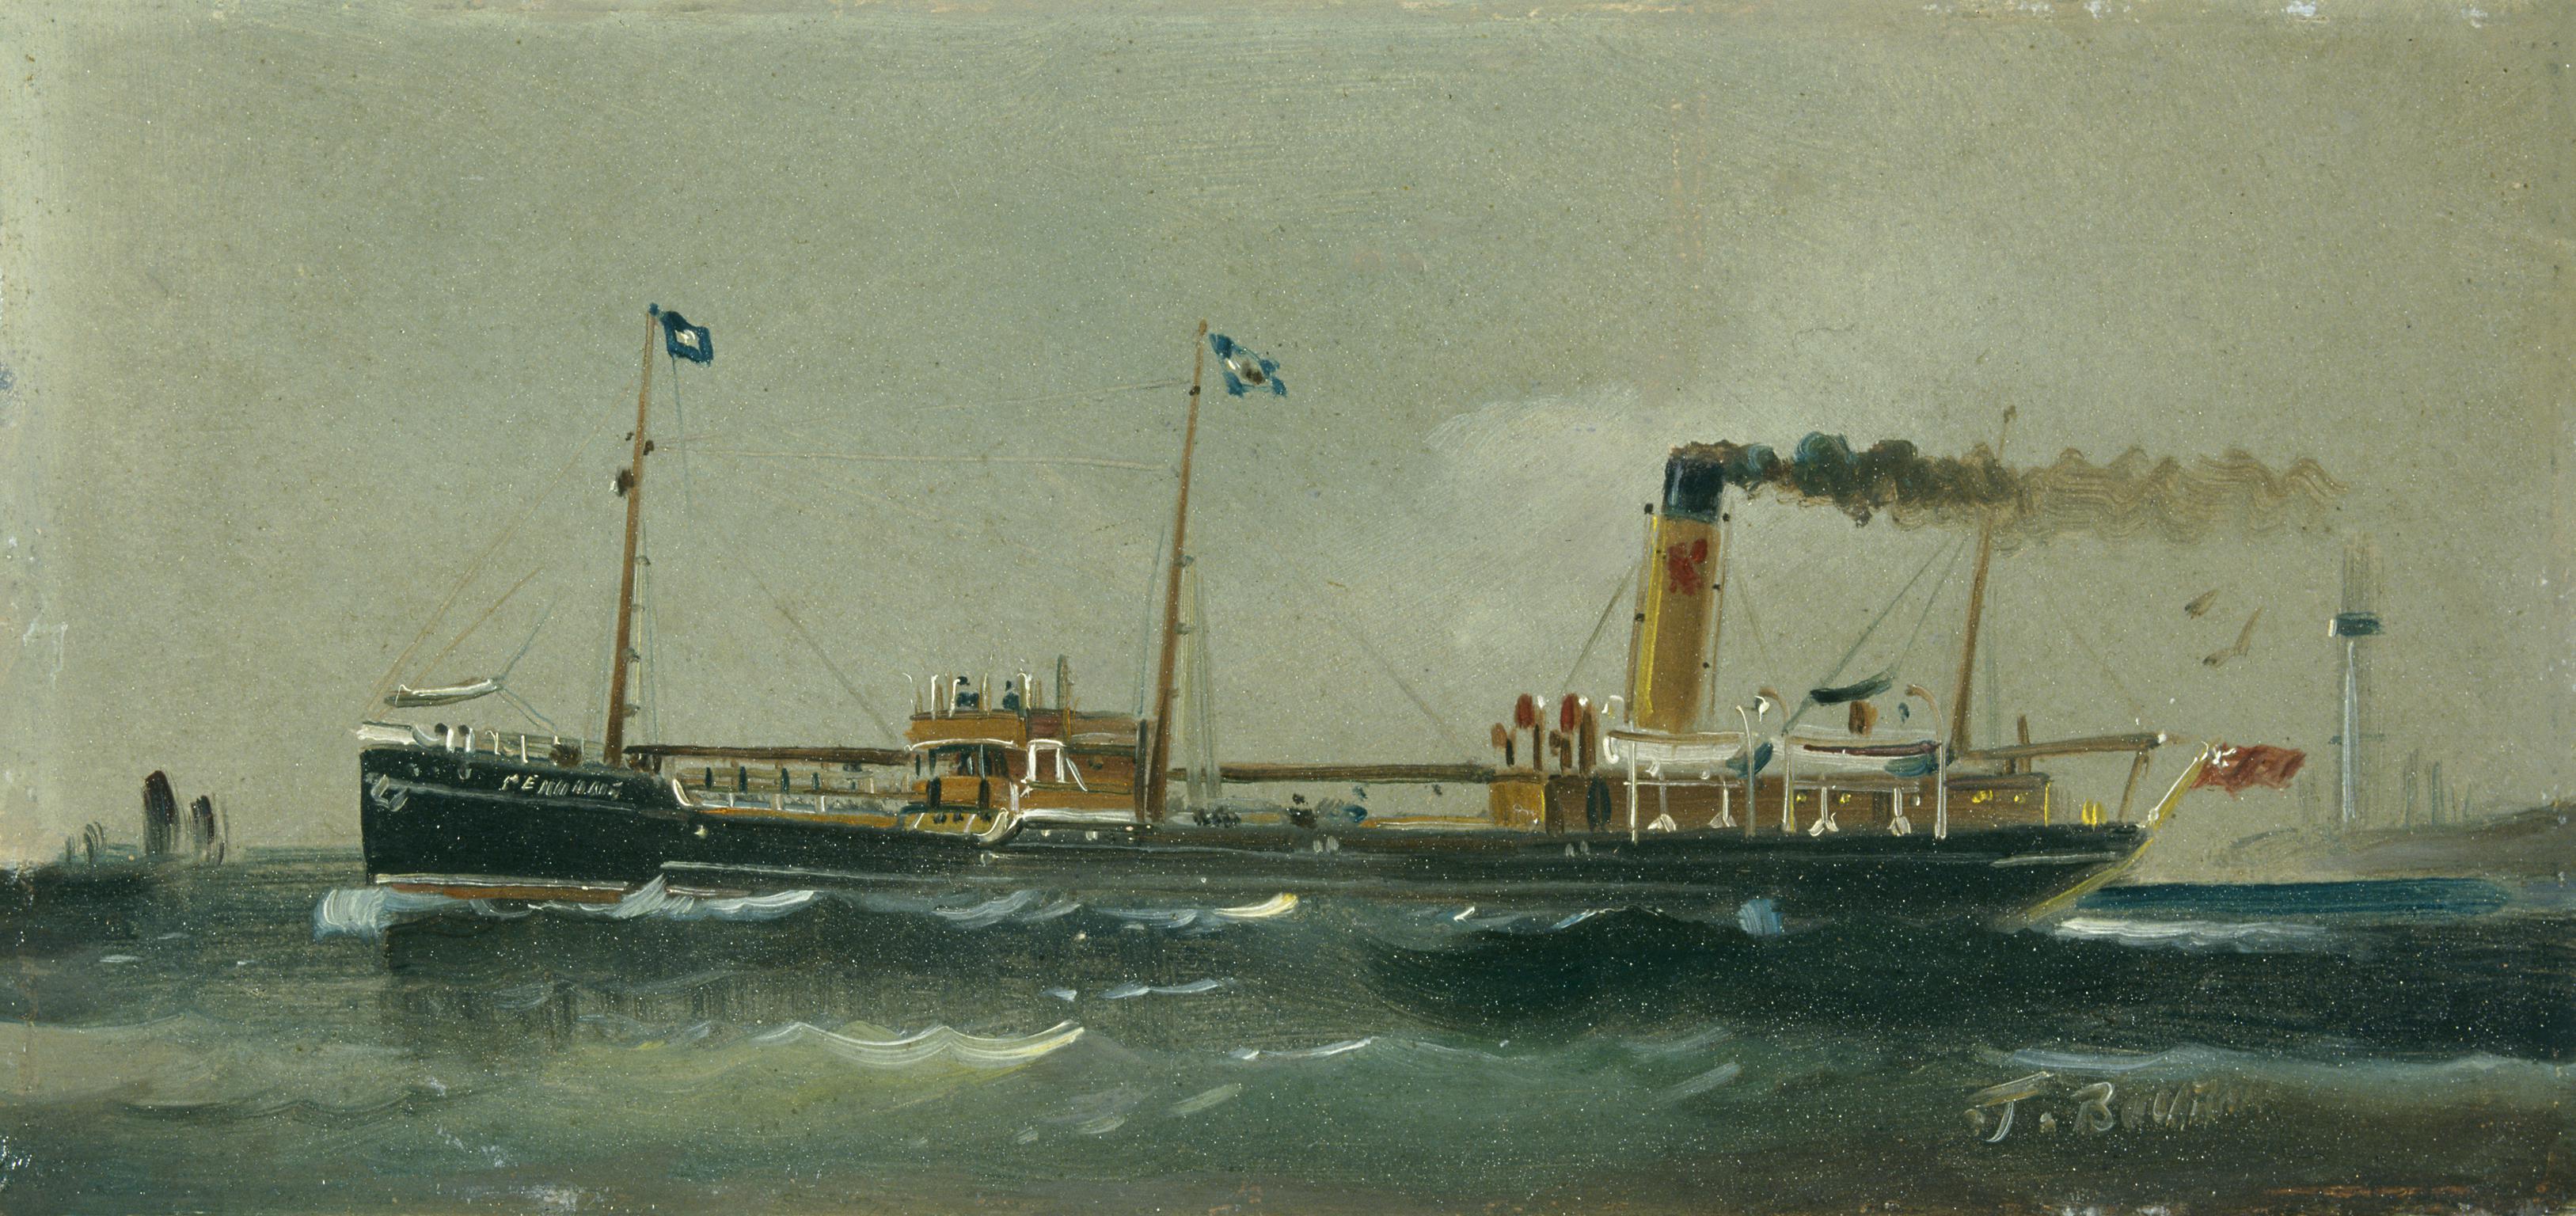 S.S. PENNANT (painting)